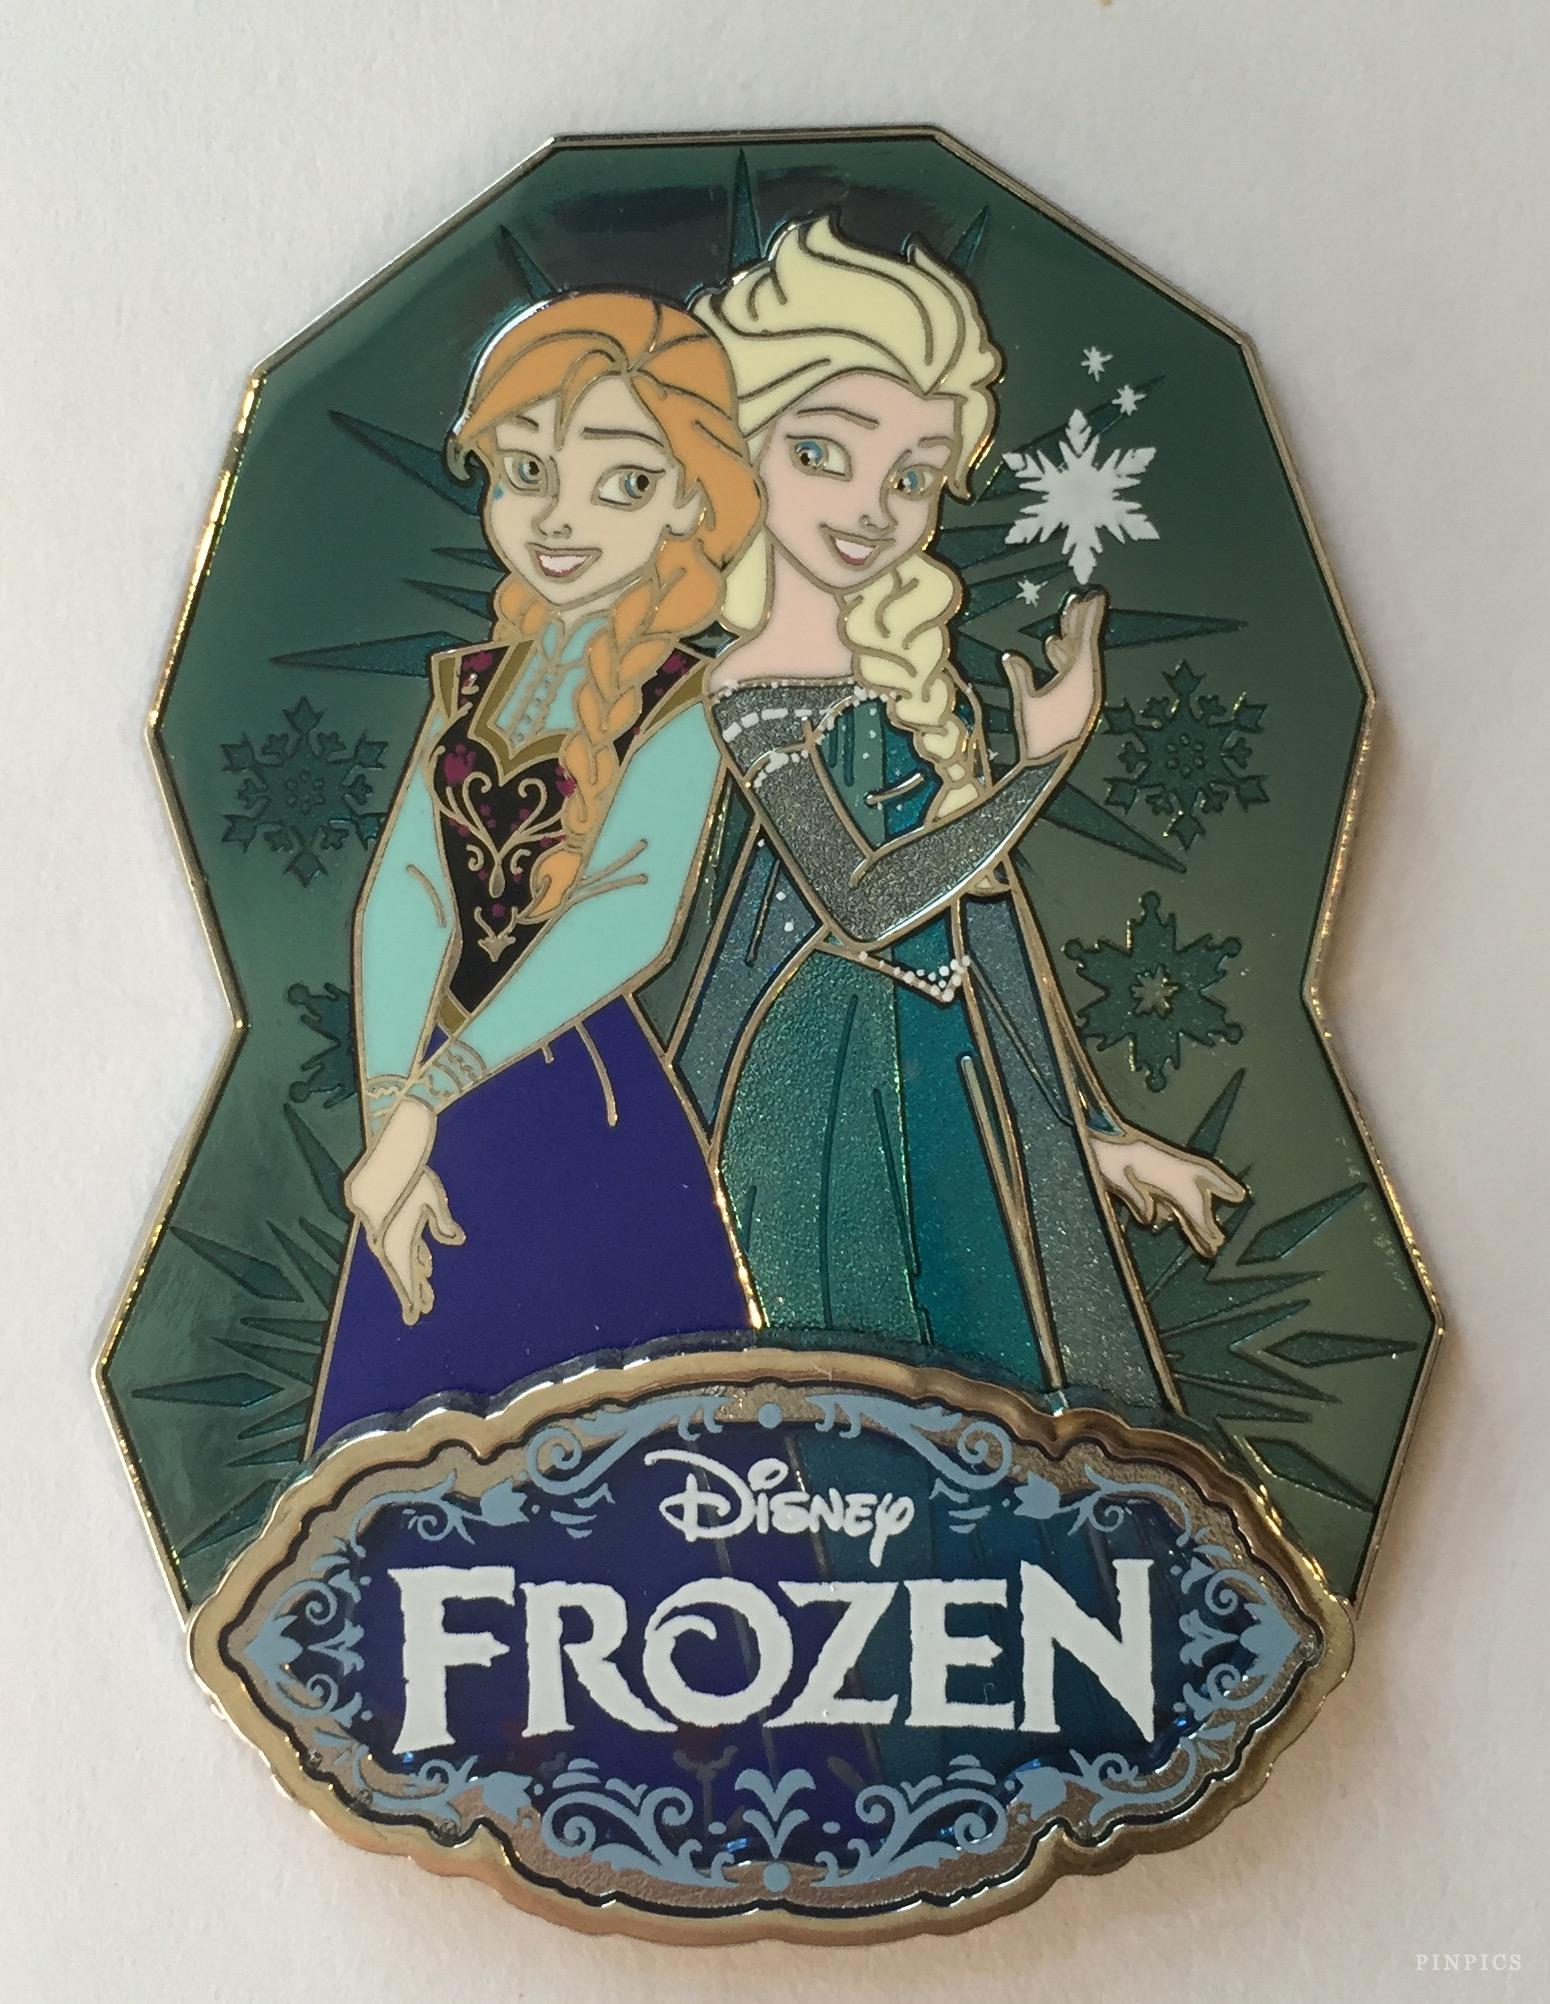 DS FROZEN - Elsa and Anna Pin